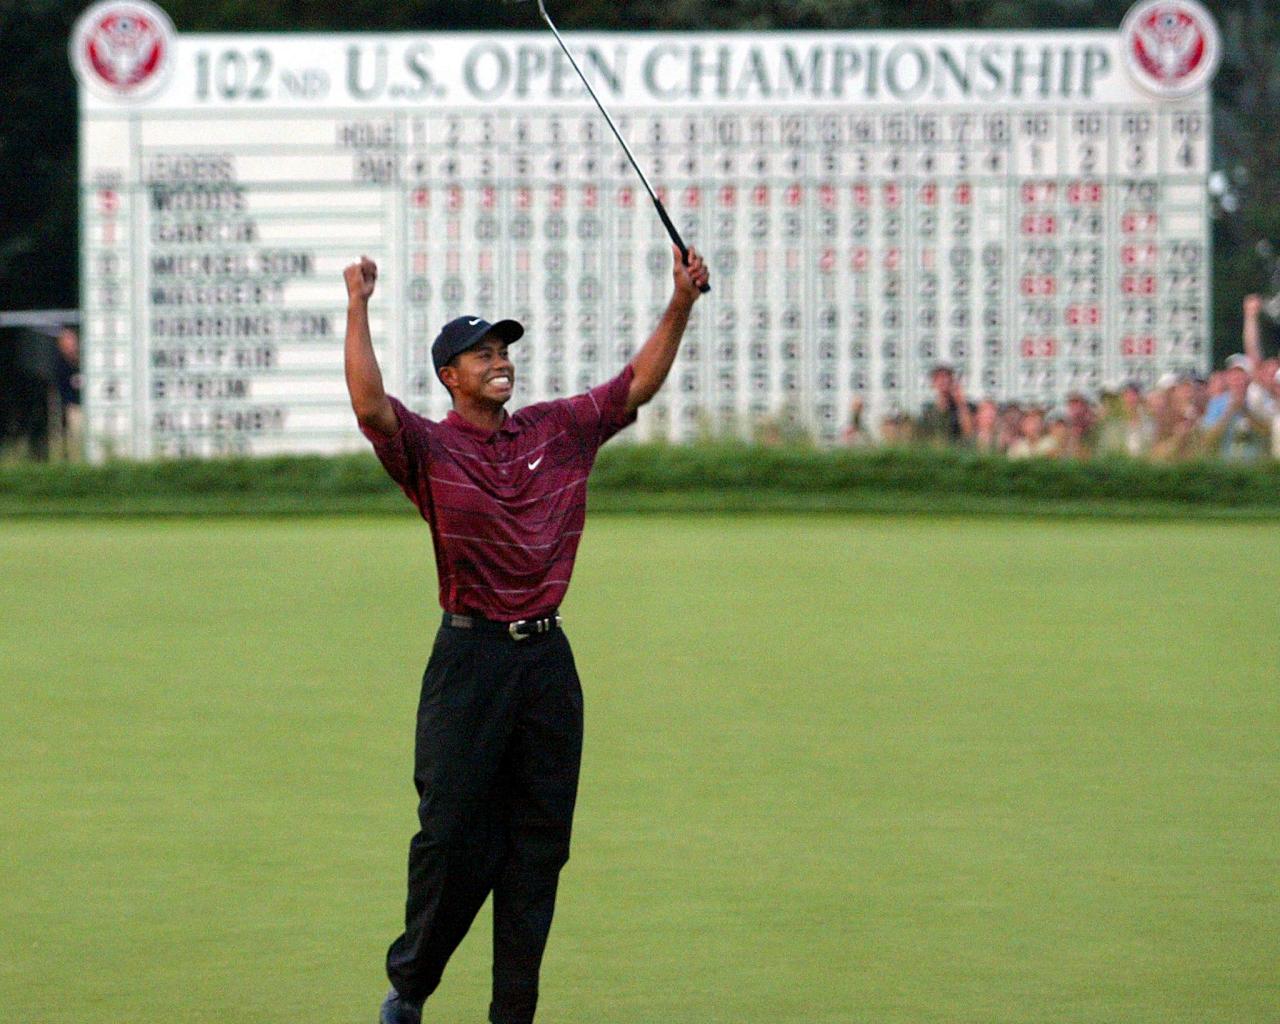 Which major championship did Tiger Woods win in his first full season as a professional?